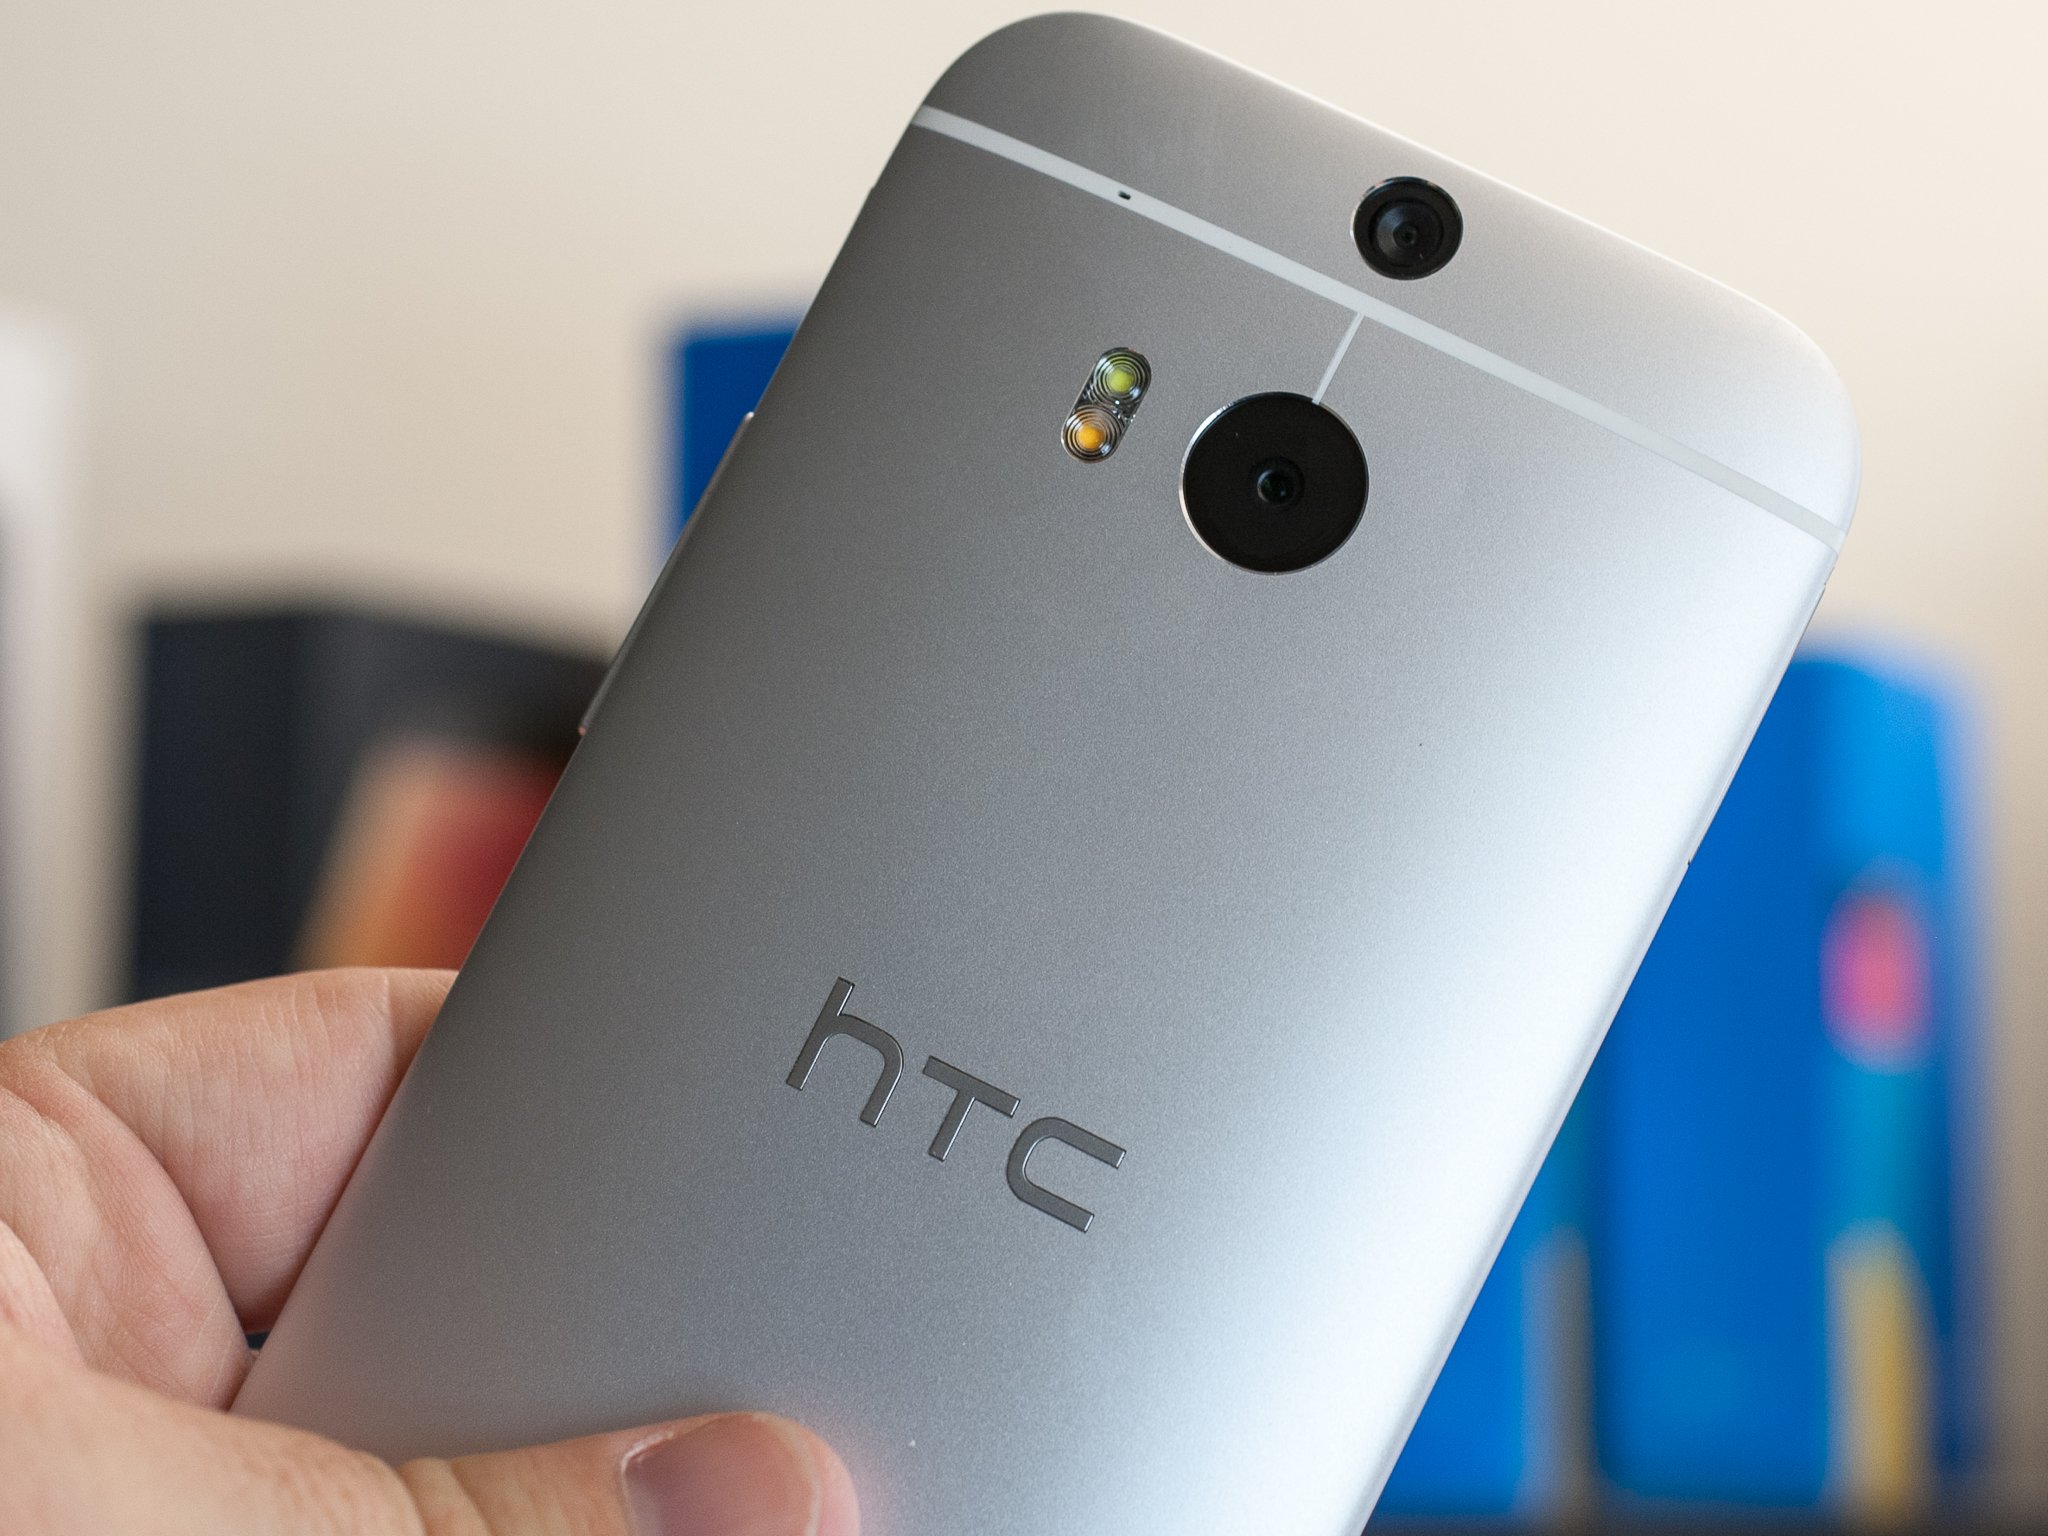 HTC One M8 Google Play edition